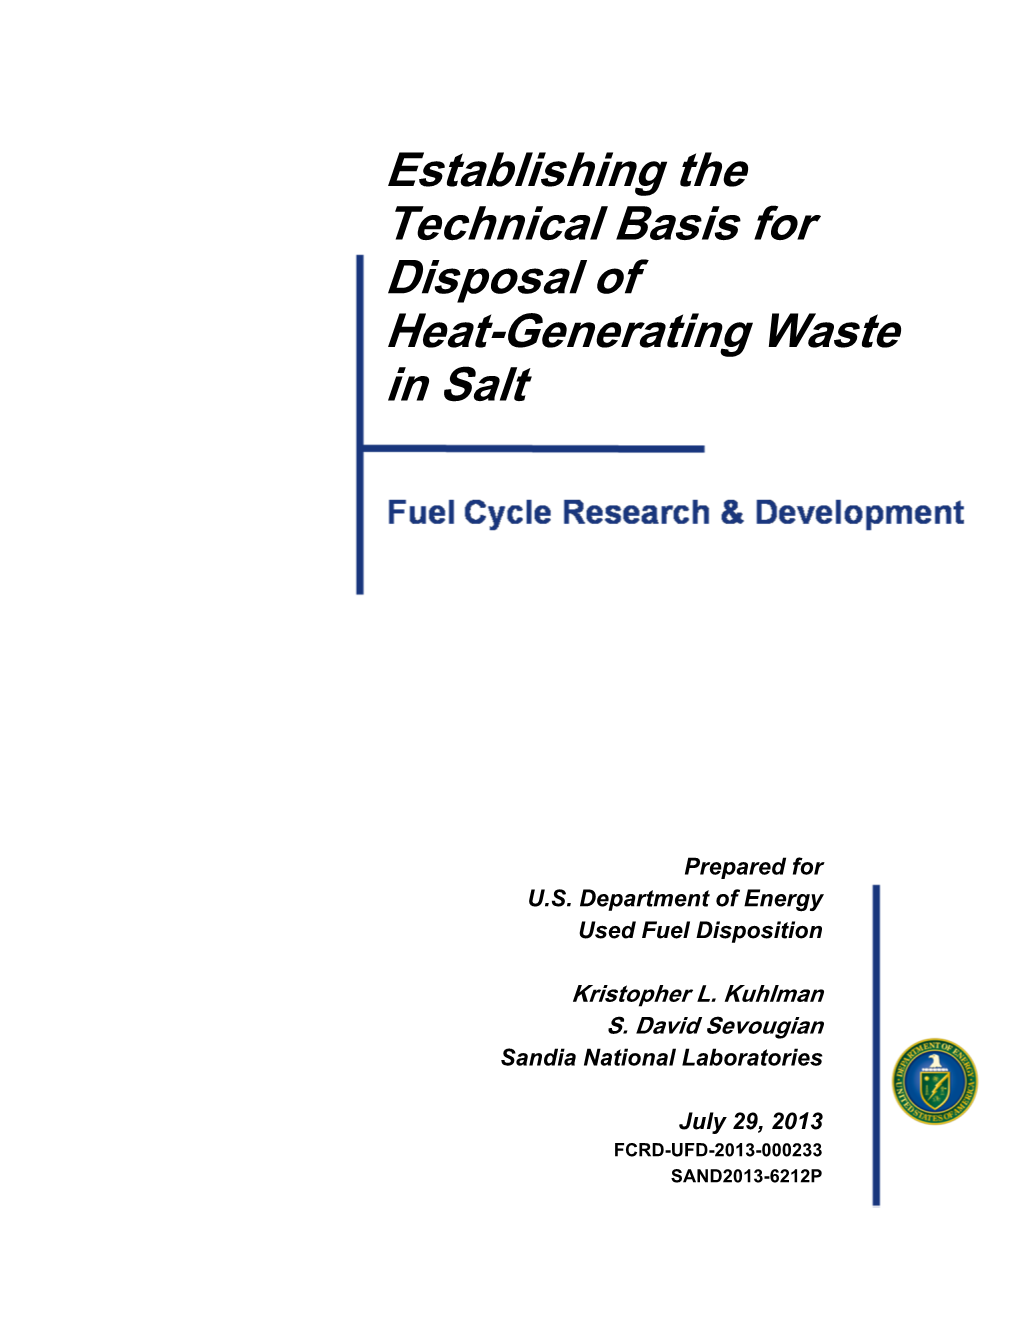 Establishing the Technical Basis for Disposal of Heat-Generating Waste in Salt